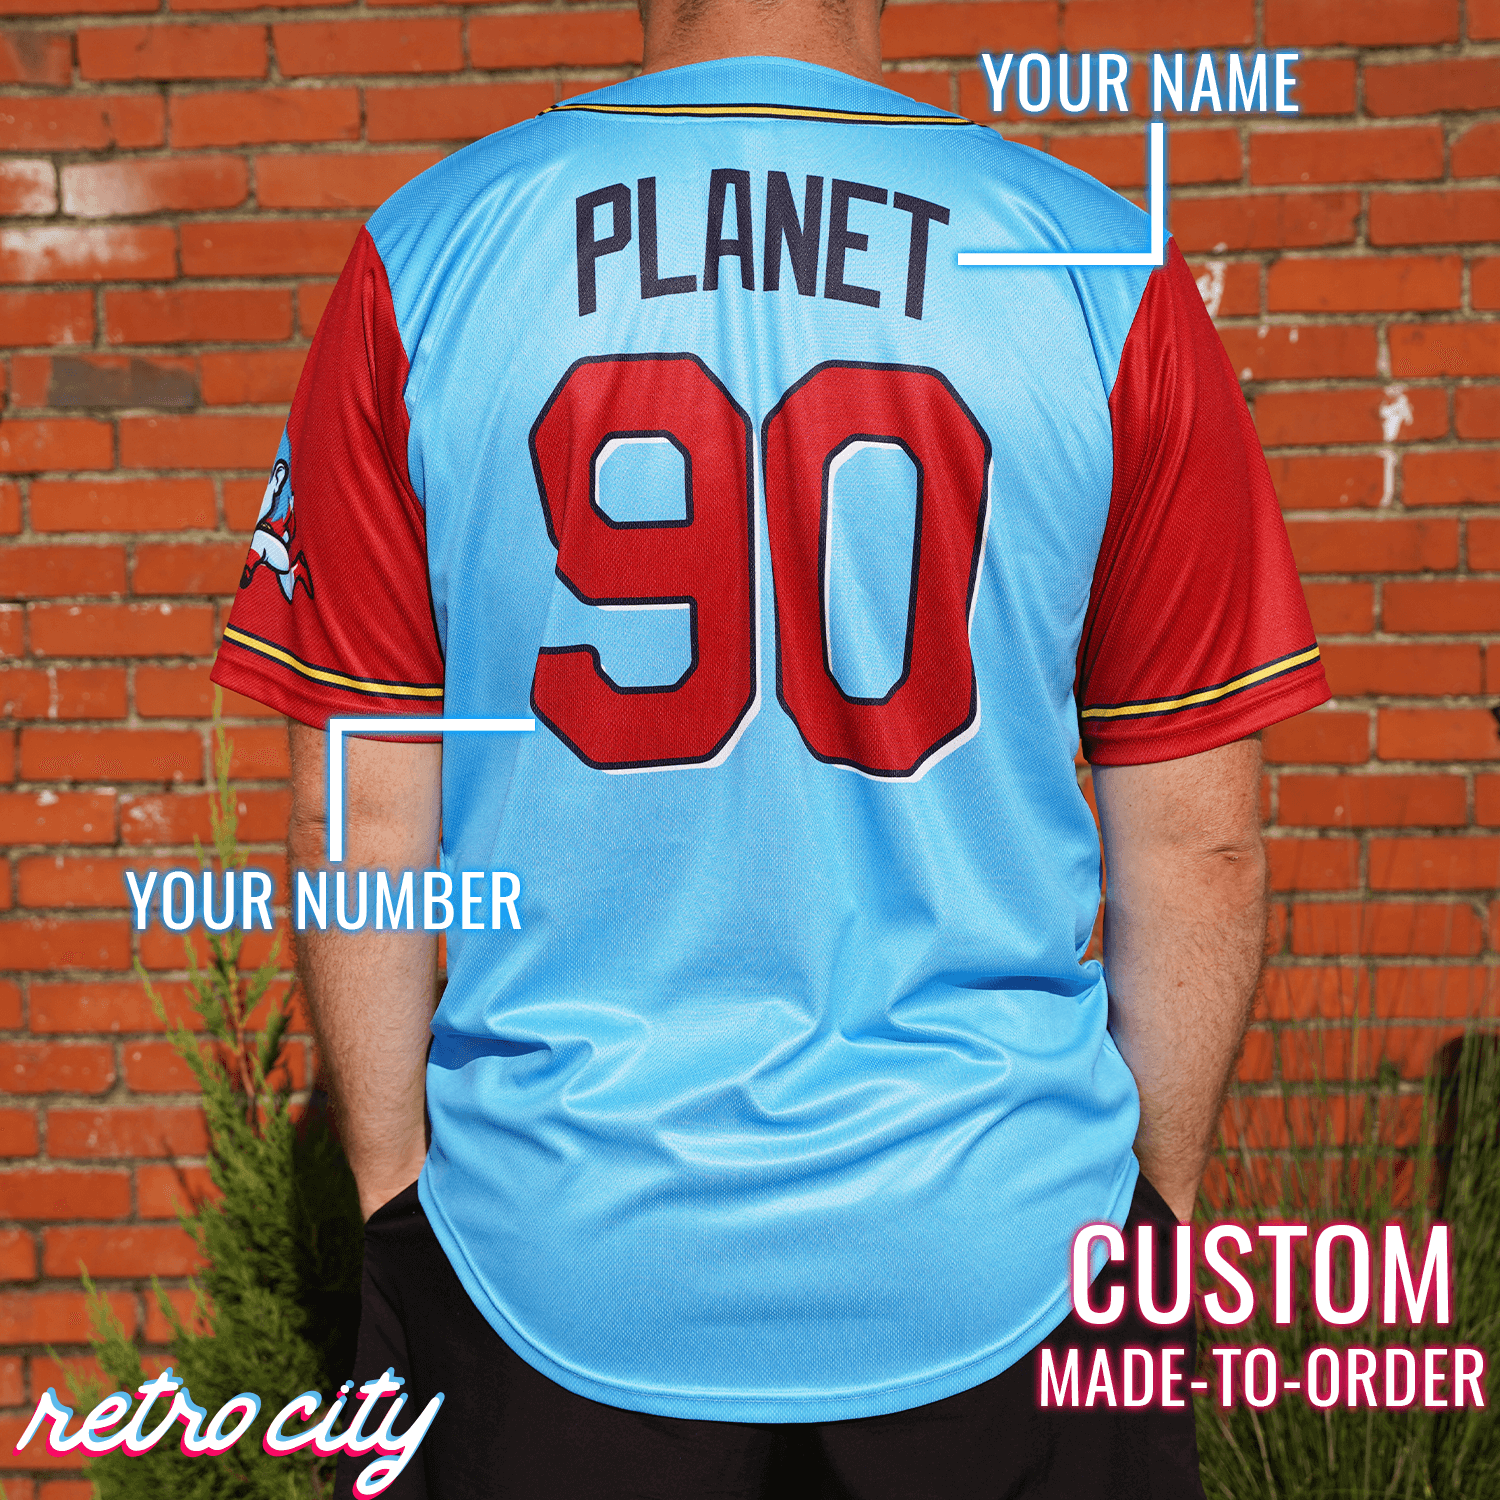 Planeteers Captain Planet Full-Button Baseball Jersey